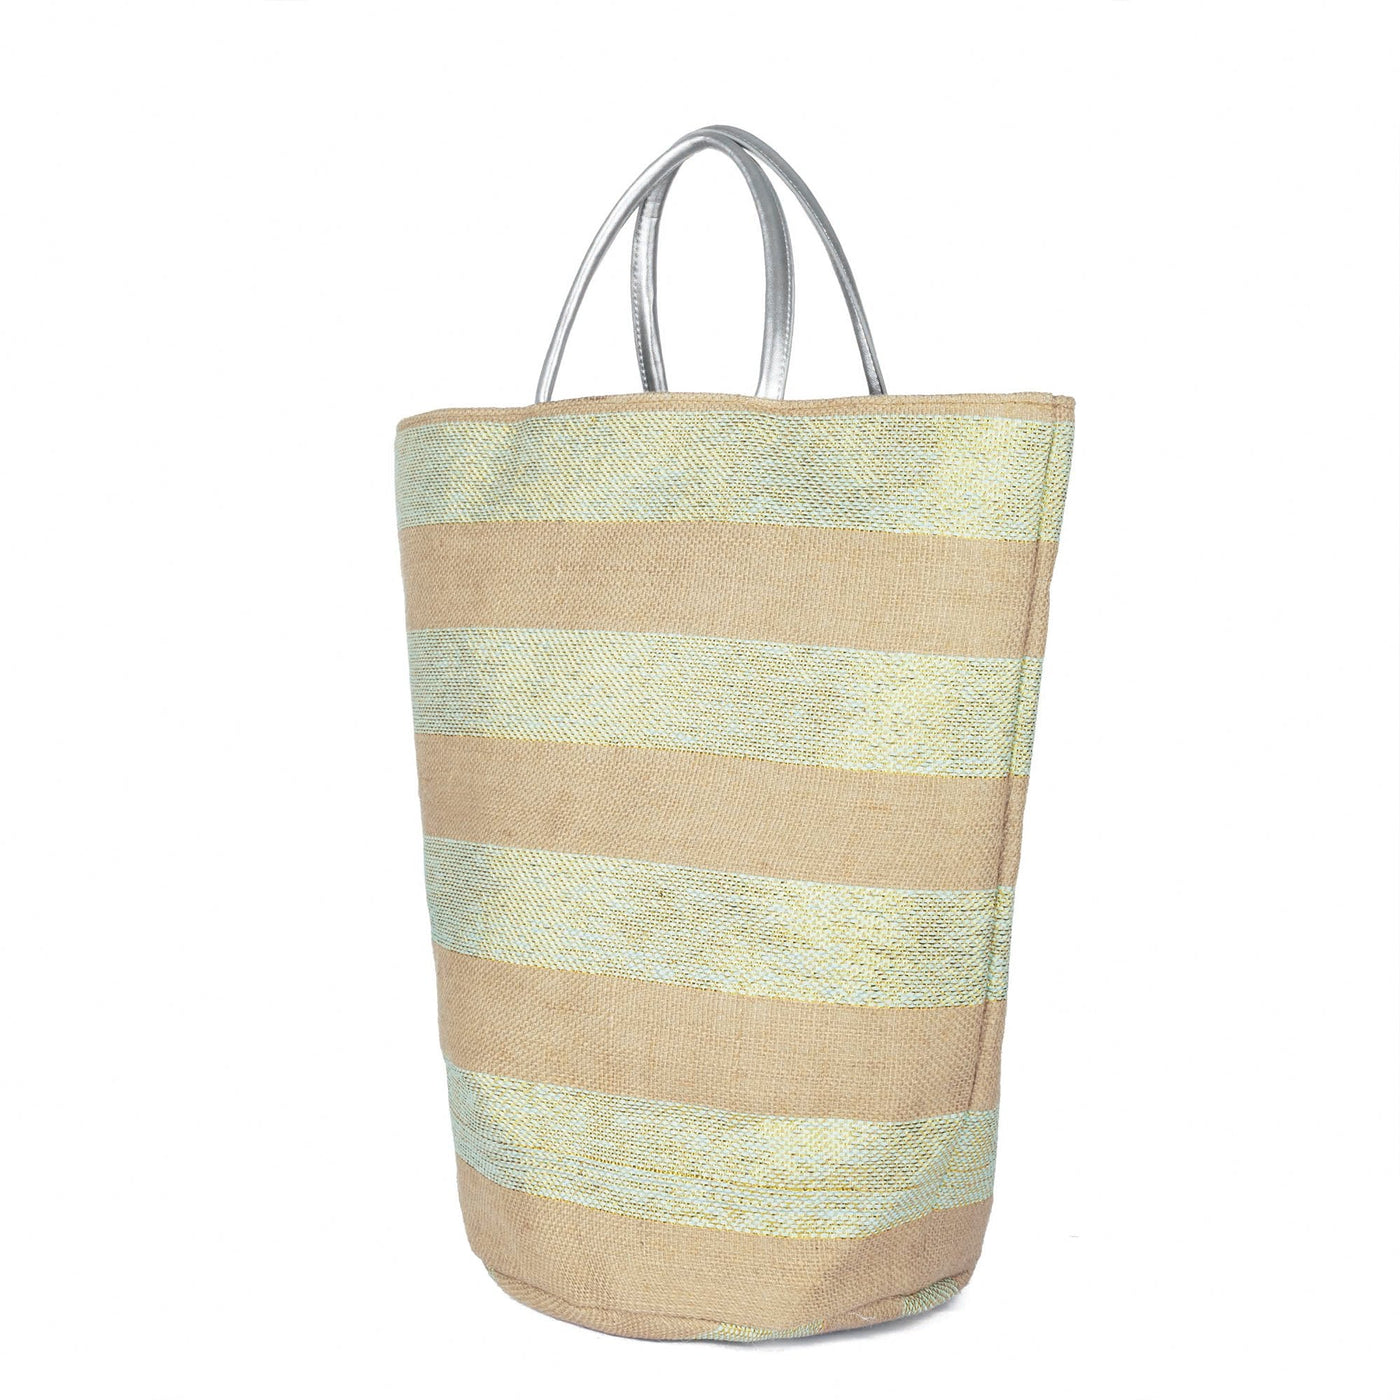 TOTE - Striped Tote With Metallic Silver Leather Handles (BSB3755)